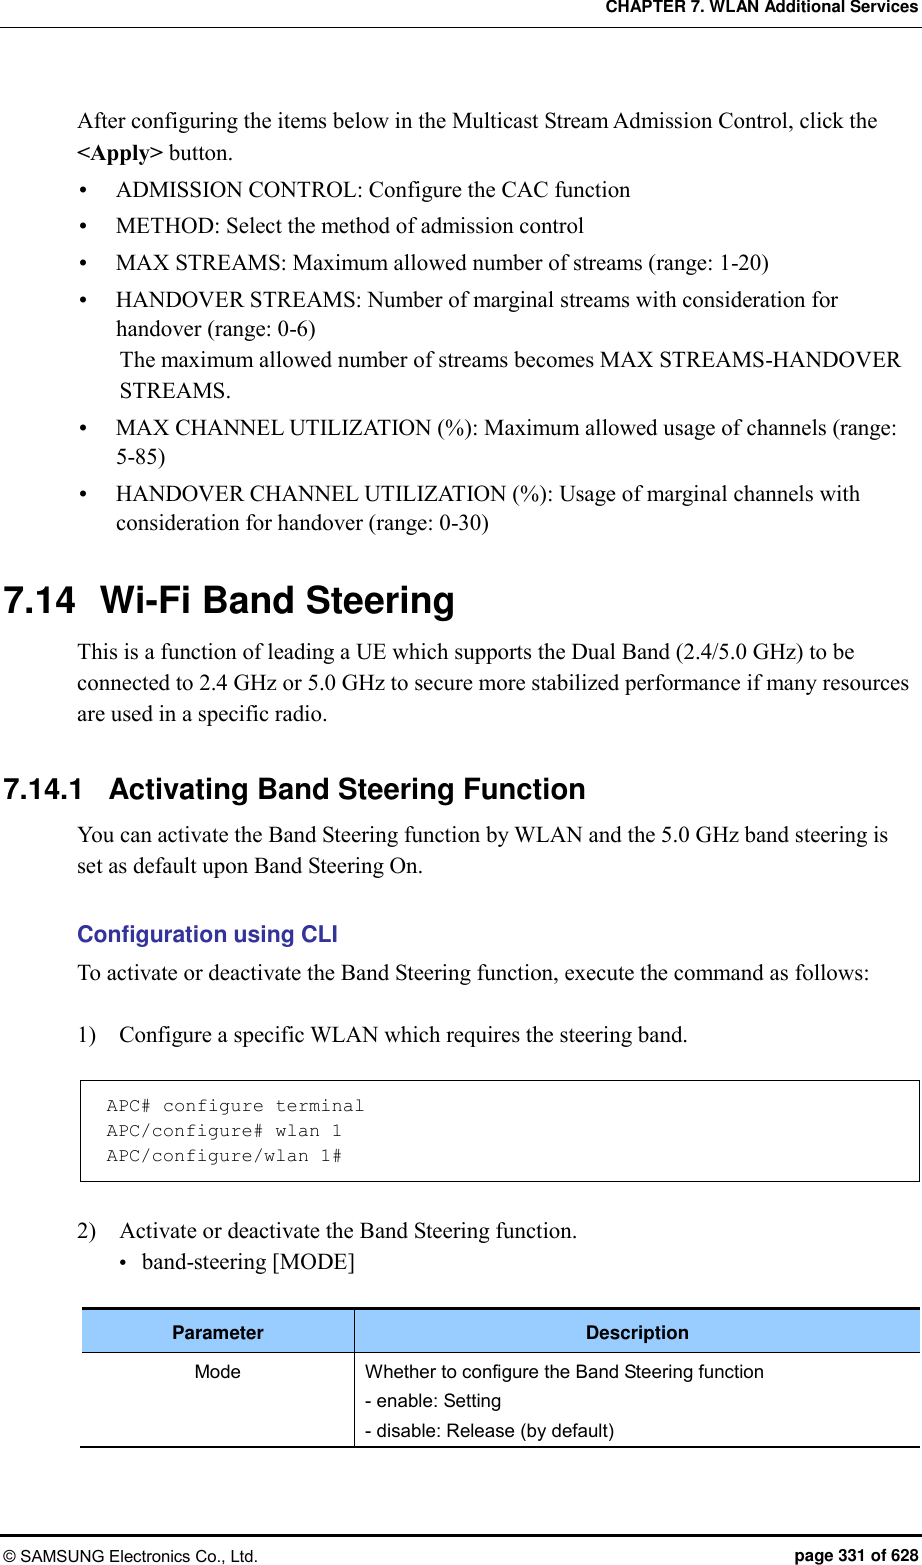 CHAPTER 7. WLAN Additional Services © SAMSUNG Electronics Co., Ltd.  page 331 of 628 After configuring the items below in the Multicast Stream Admission Control, click the &lt;Apply&gt; button.  ADMISSION CONTROL: Configure the CAC function  METHOD: Select the method of admission control  MAX STREAMS: Maximum allowed number of streams (range: 1-20)  HANDOVER STREAMS: Number of marginal streams with consideration for handover (range: 0-6) The maximum allowed number of streams becomes MAX STREAMS-HANDOVER STREAMS.  MAX CHANNEL UTILIZATION (%): Maximum allowed usage of channels (range: 5-85)  HANDOVER CHANNEL UTILIZATION (%): Usage of marginal channels with consideration for handover (range: 0-30)  7.14  Wi-Fi Band Steering This is a function of leading a UE which supports the Dual Band (2.4/5.0 GHz) to be connected to 2.4 GHz or 5.0 GHz to secure more stabilized performance if many resources are used in a specific radio.  7.14.1  Activating Band Steering Function You can activate the Band Steering function by WLAN and the 5.0 GHz band steering is set as default upon Band Steering On.  Configuration using CLI To activate or deactivate the Band Steering function, execute the command as follows:  1)    Configure a specific WLAN which requires the steering band.  APC# configure terminal APC/configure# wlan 1 APC/configure/wlan 1#  2)    Activate or deactivate the Band Steering function.  band-steering [MODE]  Parameter Description Mode Whether to configure the Band Steering function - enable: Setting - disable: Release (by default)  